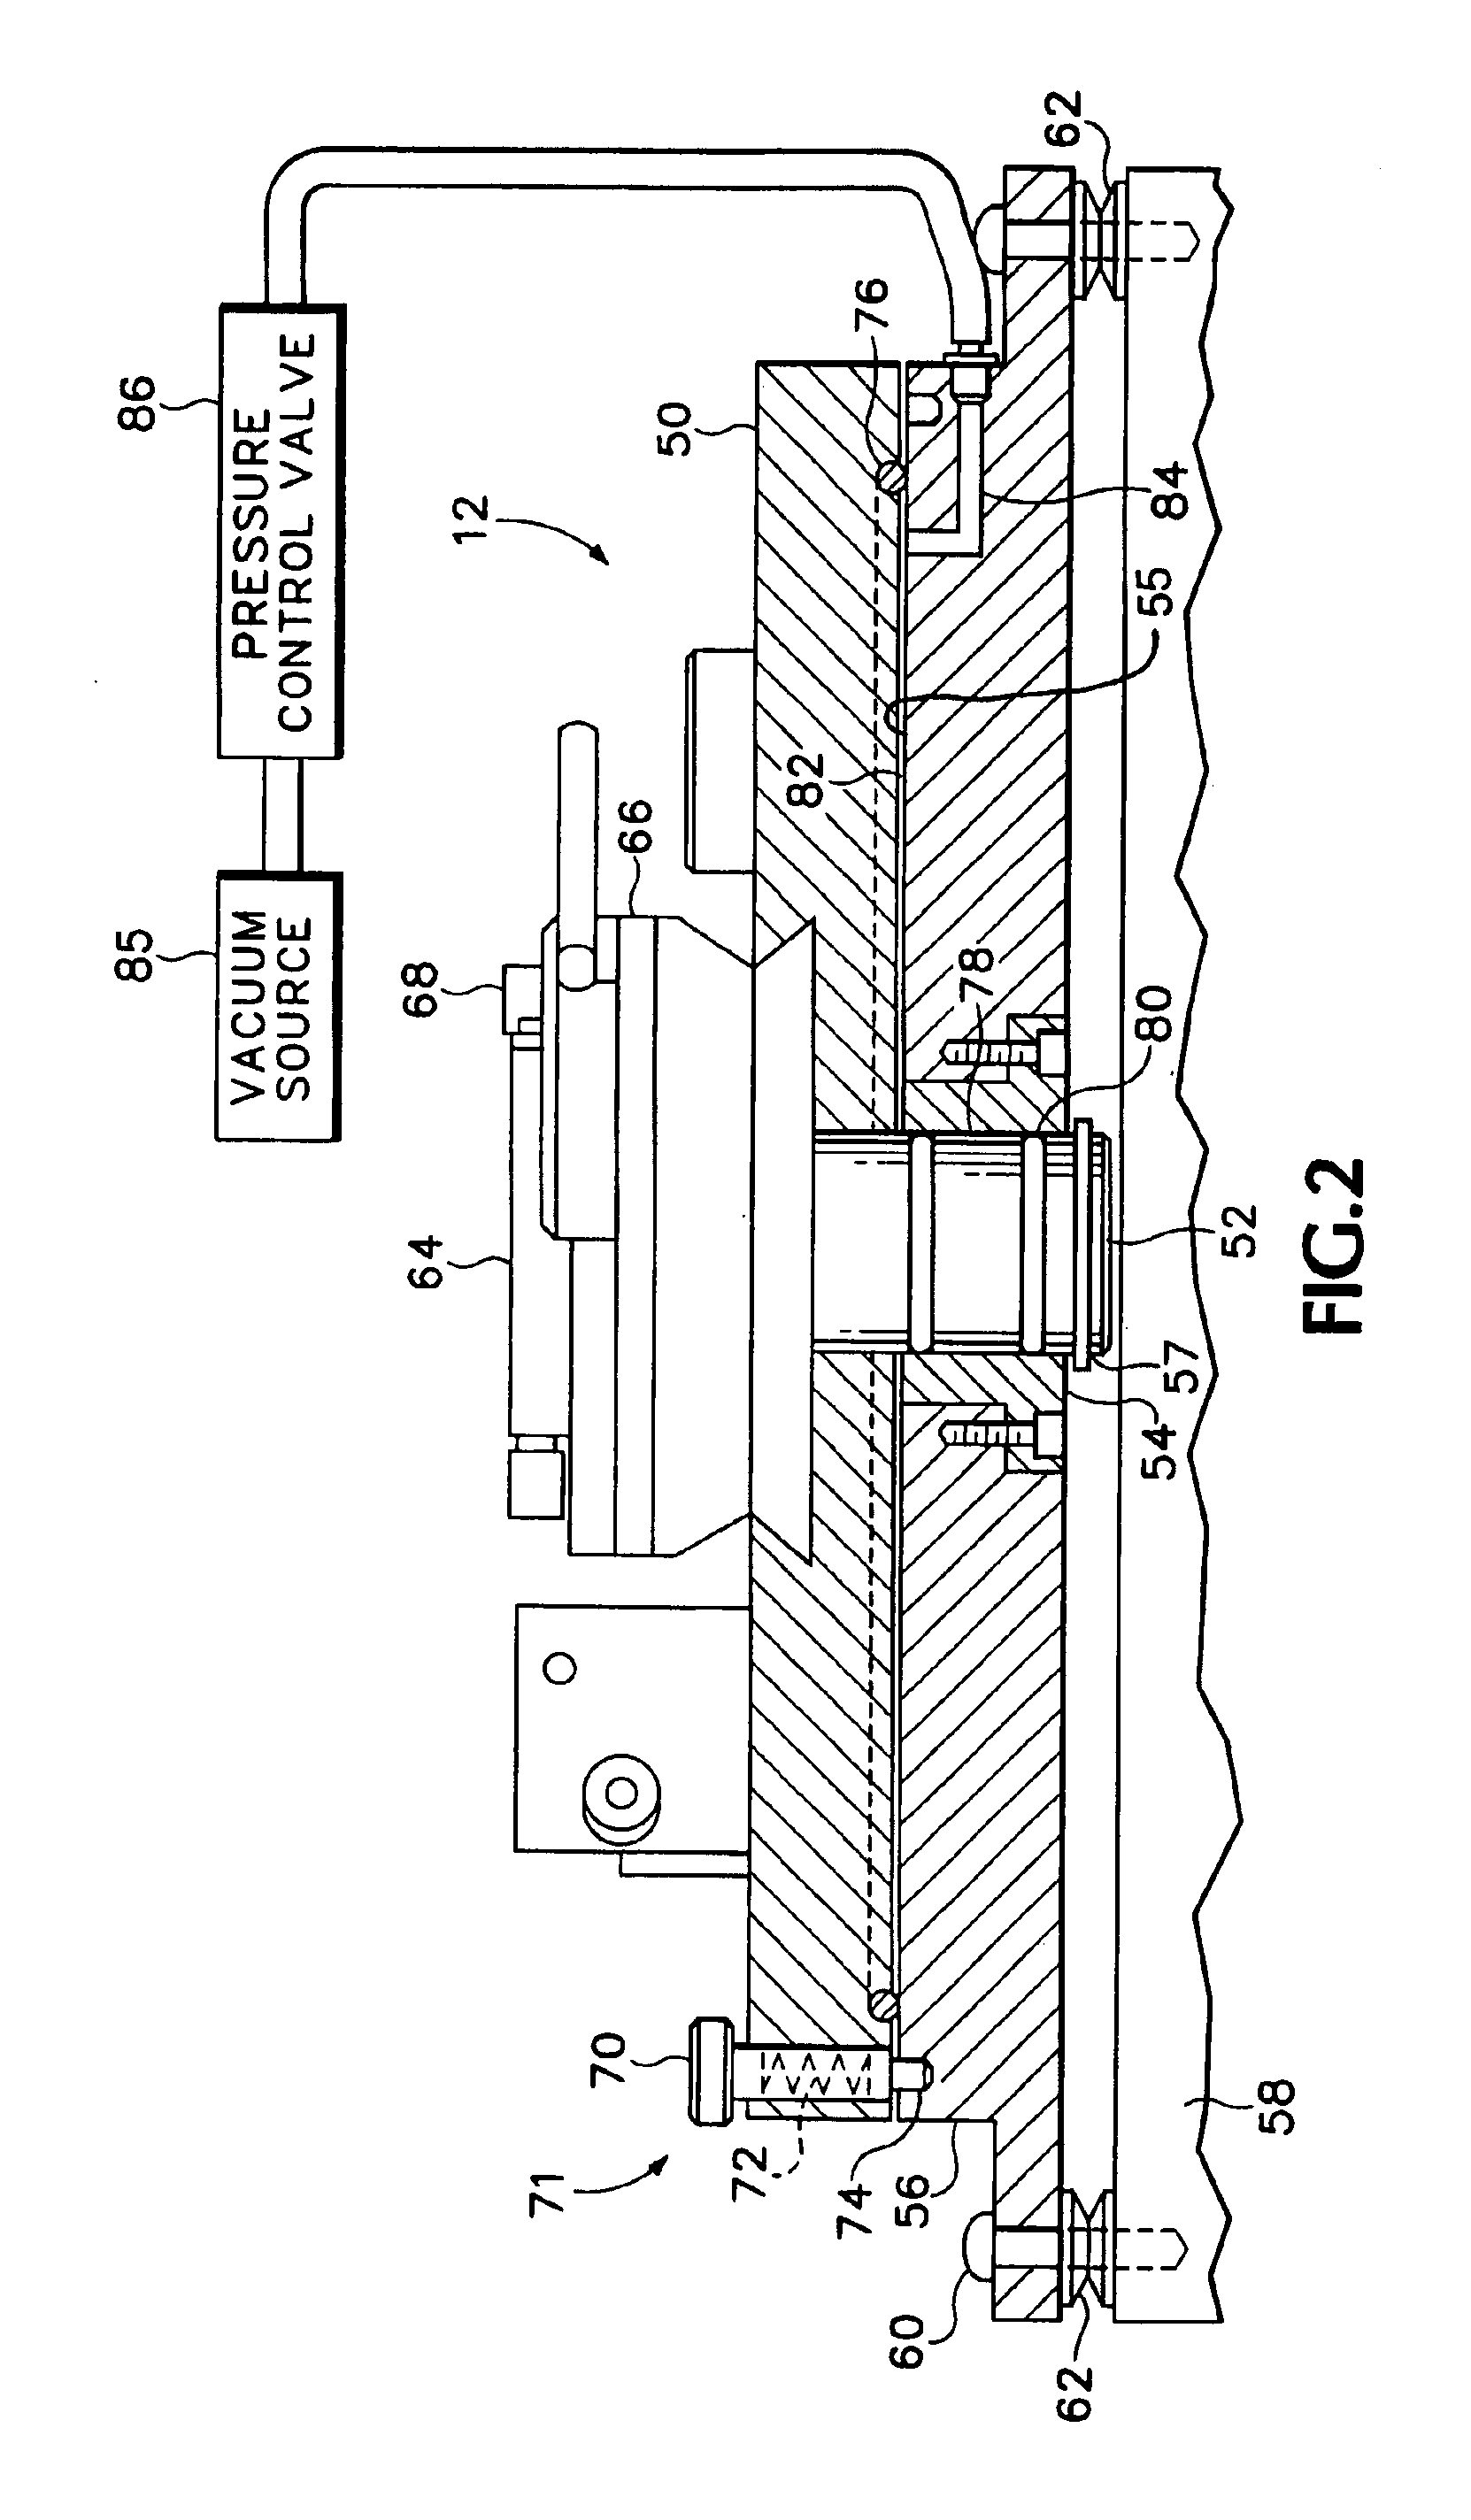 Indexing rotatable chuck for a probe station